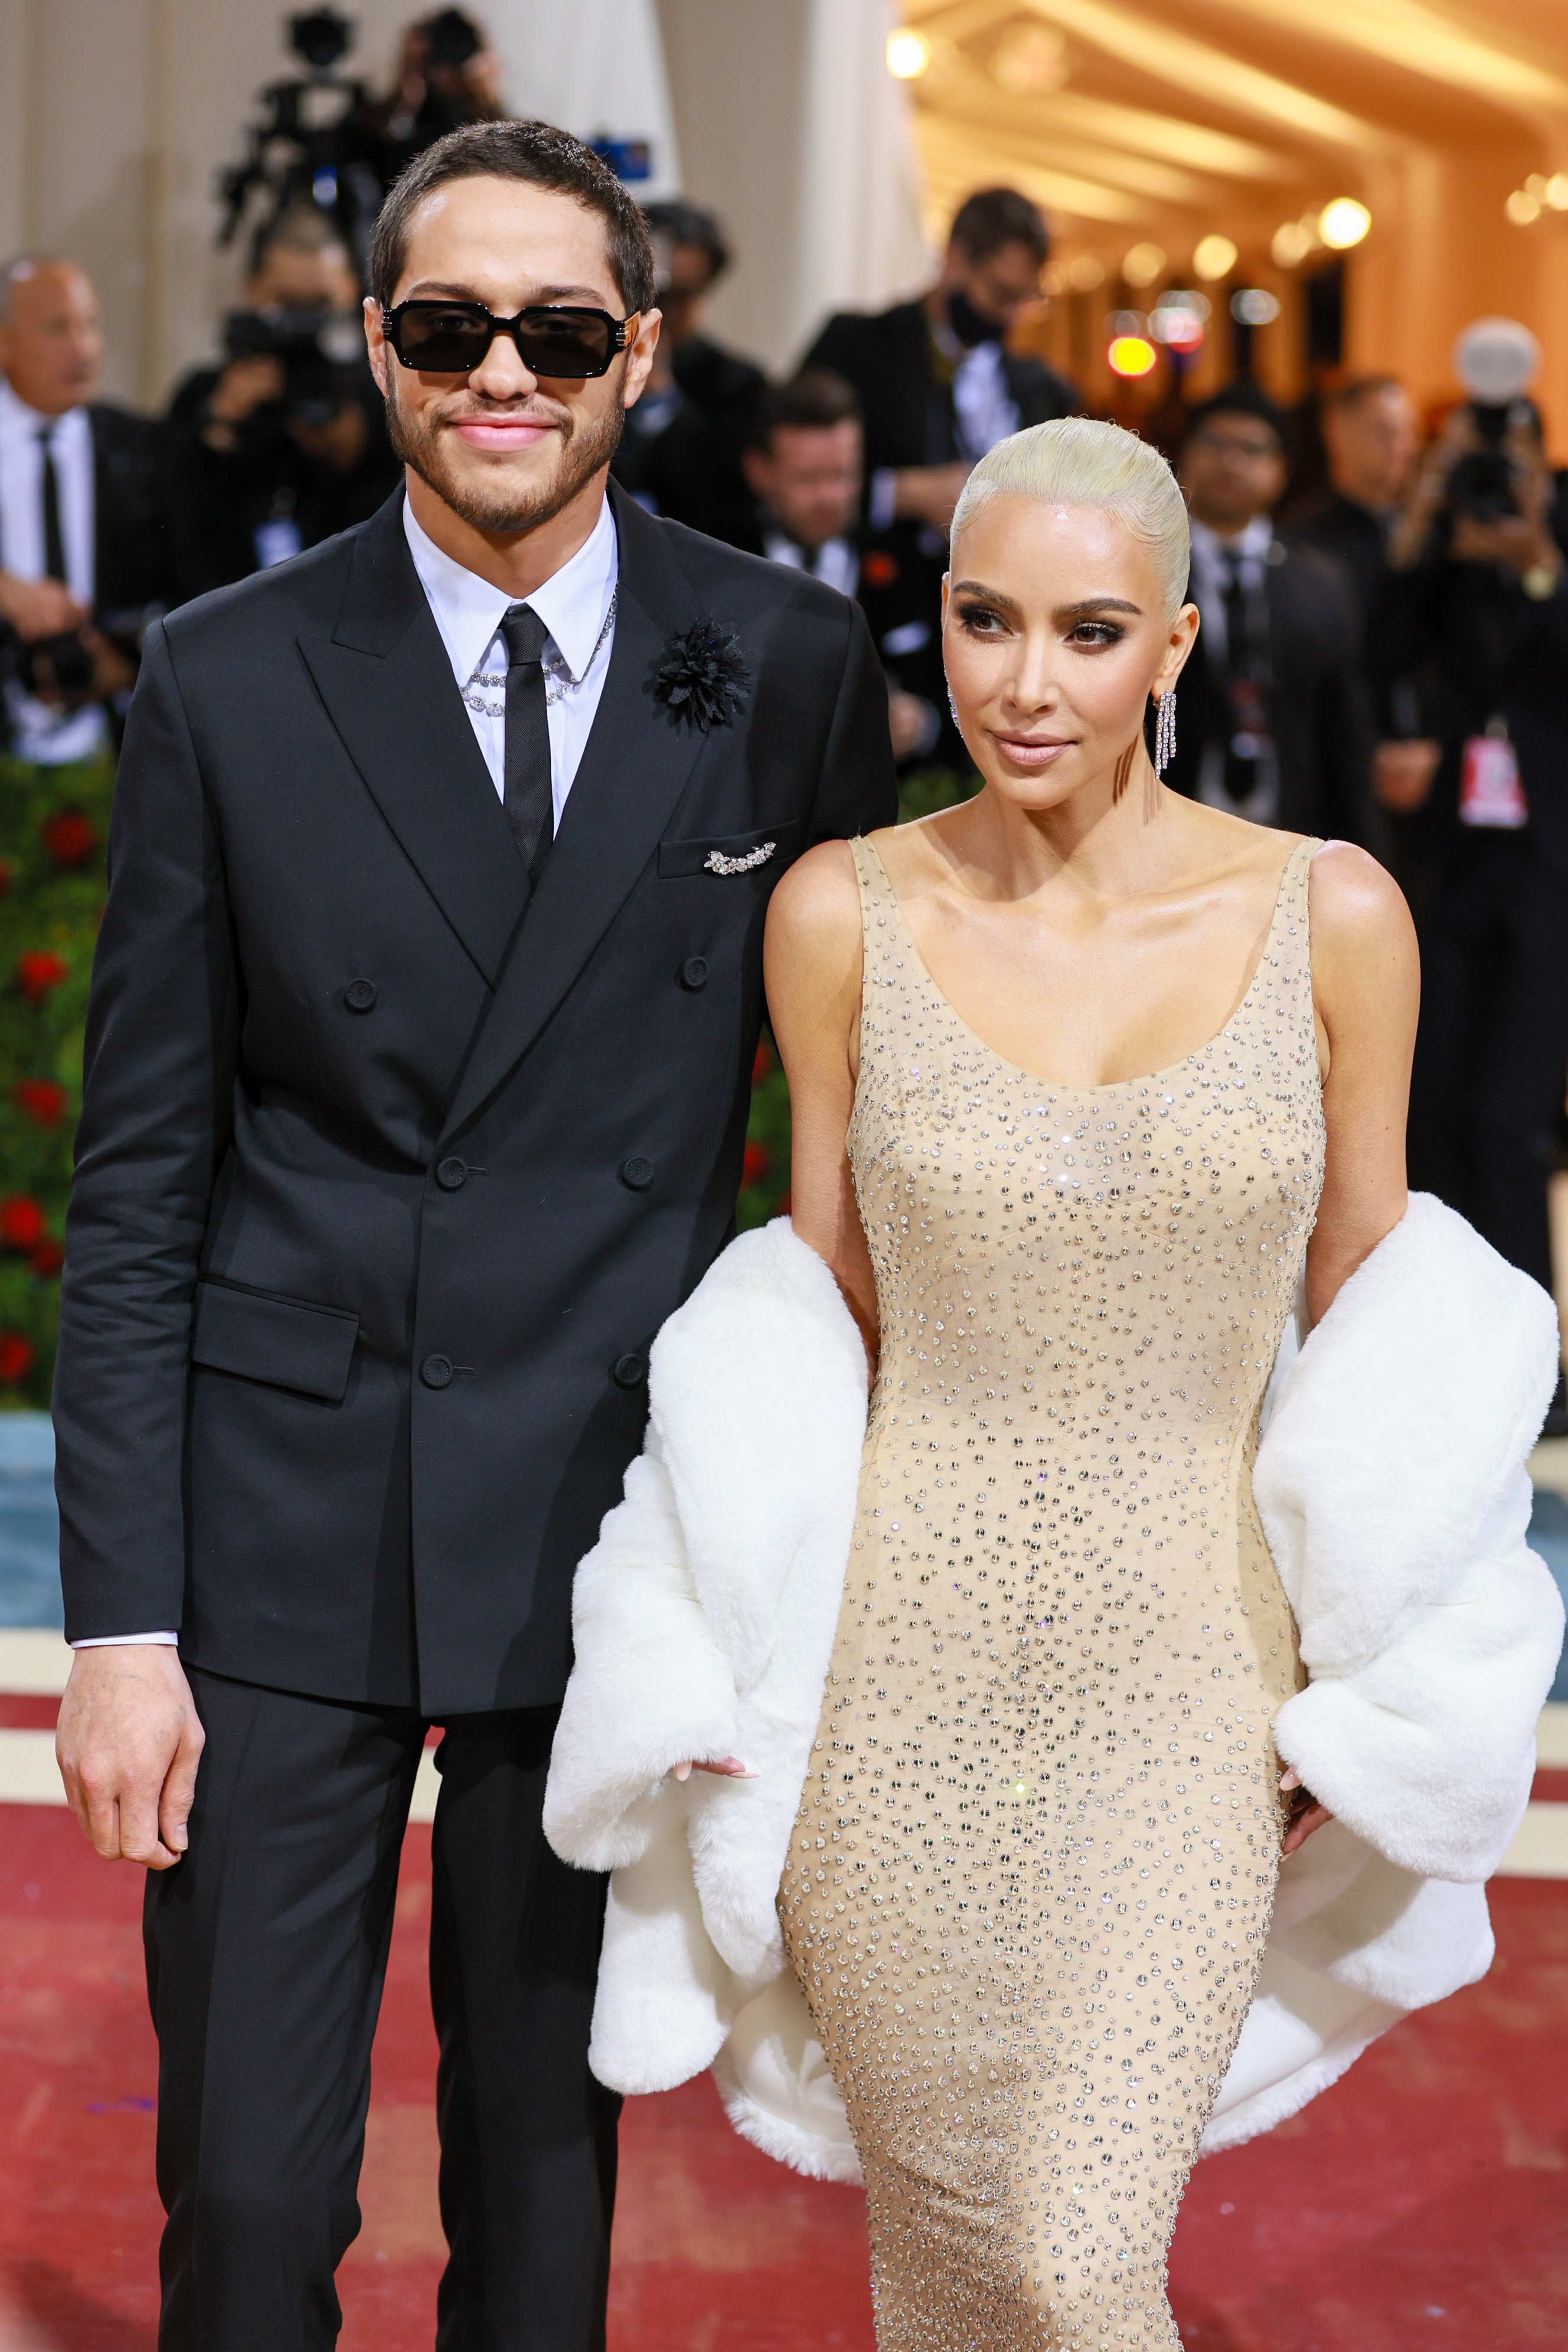 NEW YORK, NEW YORK - MAY 02: (L-R) Pete Davidson and Kim Kardashian attend The 2022 Met Gala Celebrating "In America: An Anthology of Fashion" at The Metropolitan Museum of Art on May 02, 2022 in New York City. (Photo by Theo Wargo/WireImage) (Foto: WireImage)